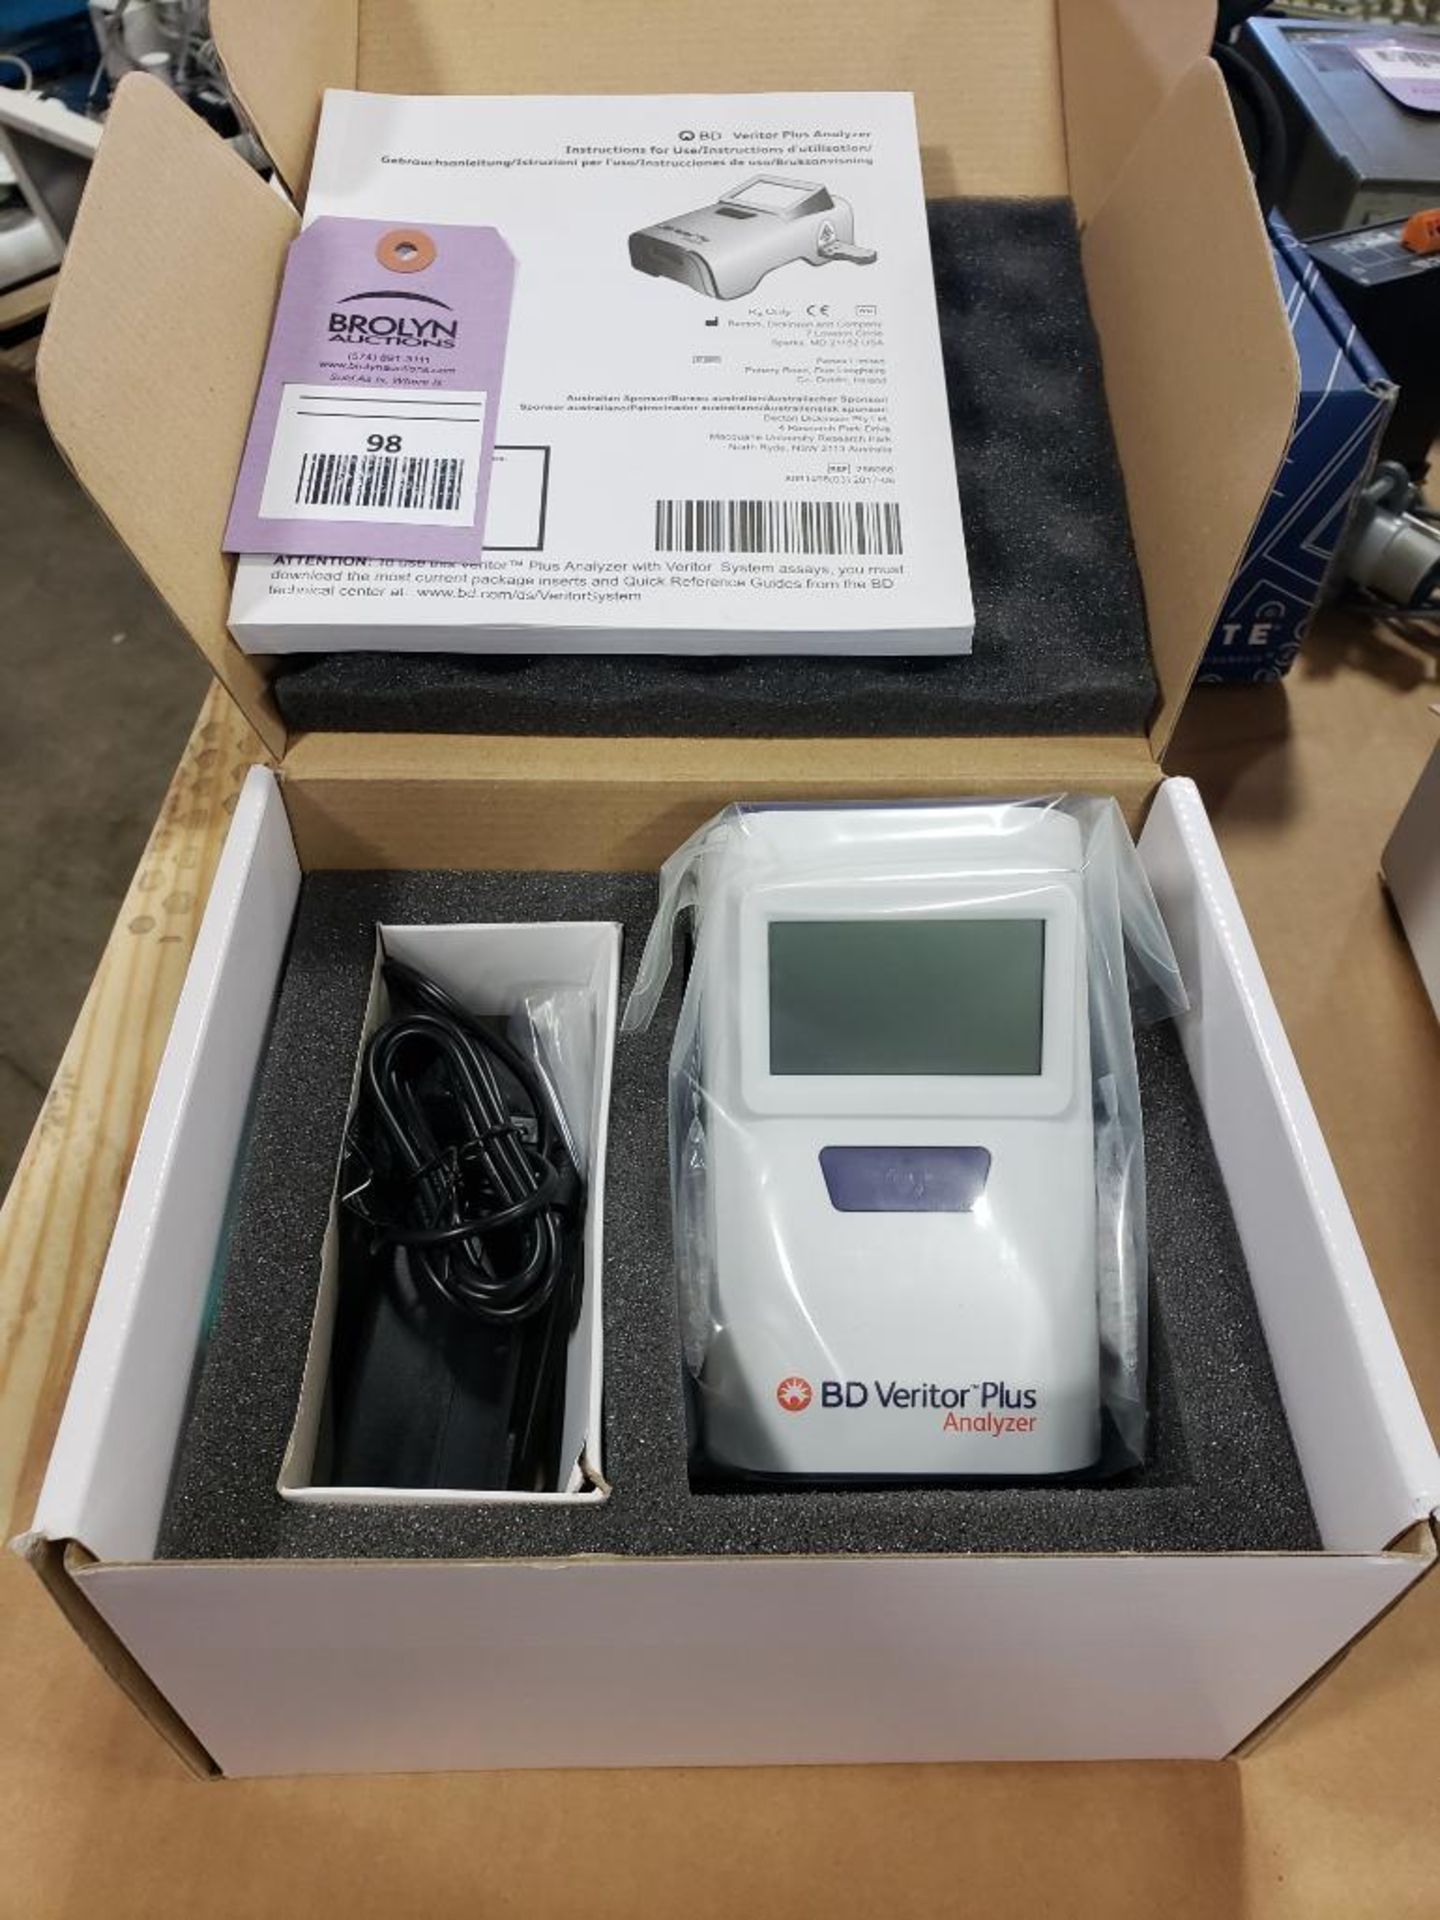 BD Veritor Plus analyzer. Appears new in box.